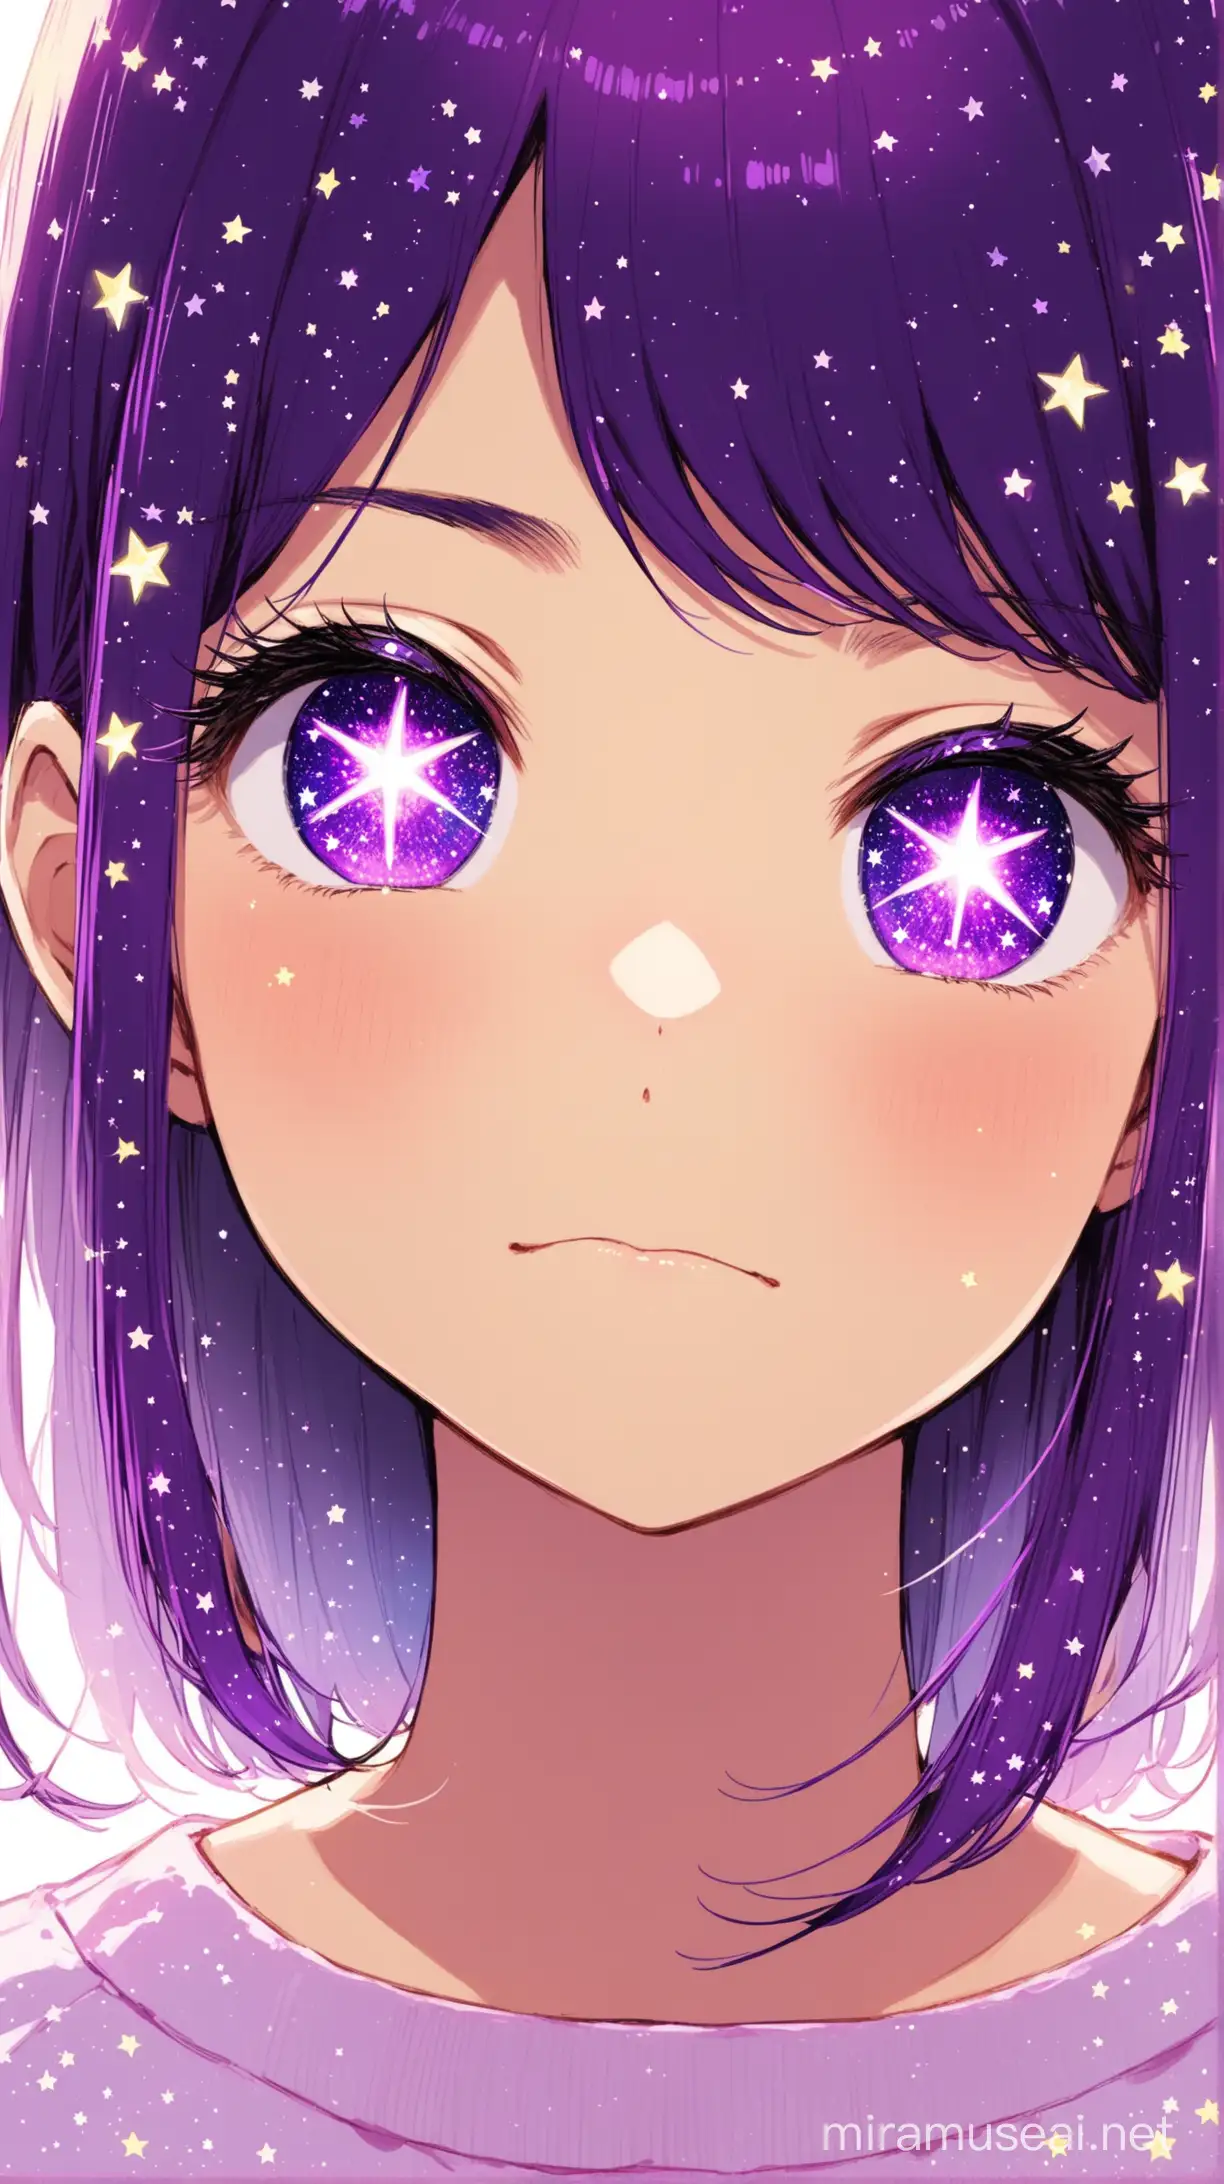 Anime Girl with Starry Eyes and Purple Hair Portrait